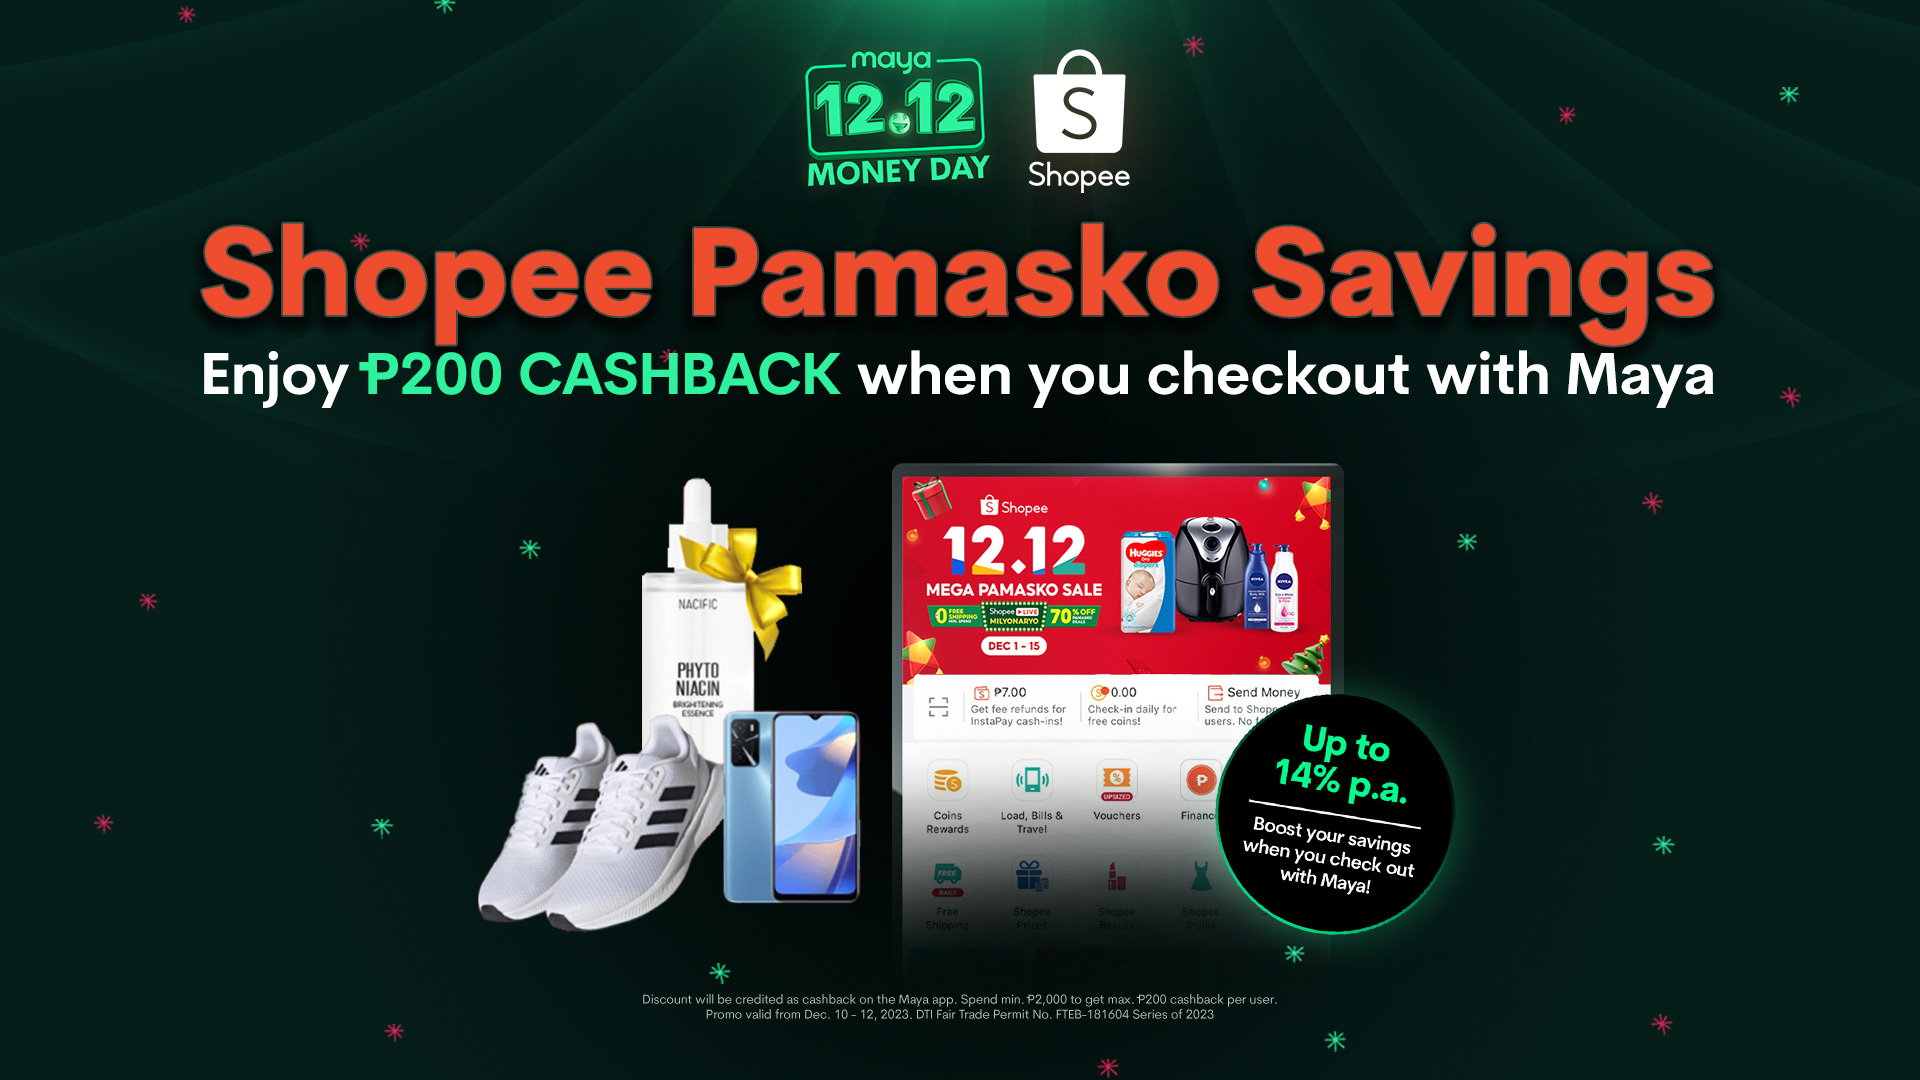 Save P200 when you checkout with Maya this Shopee 12.12 Mega Pamasko Sale!